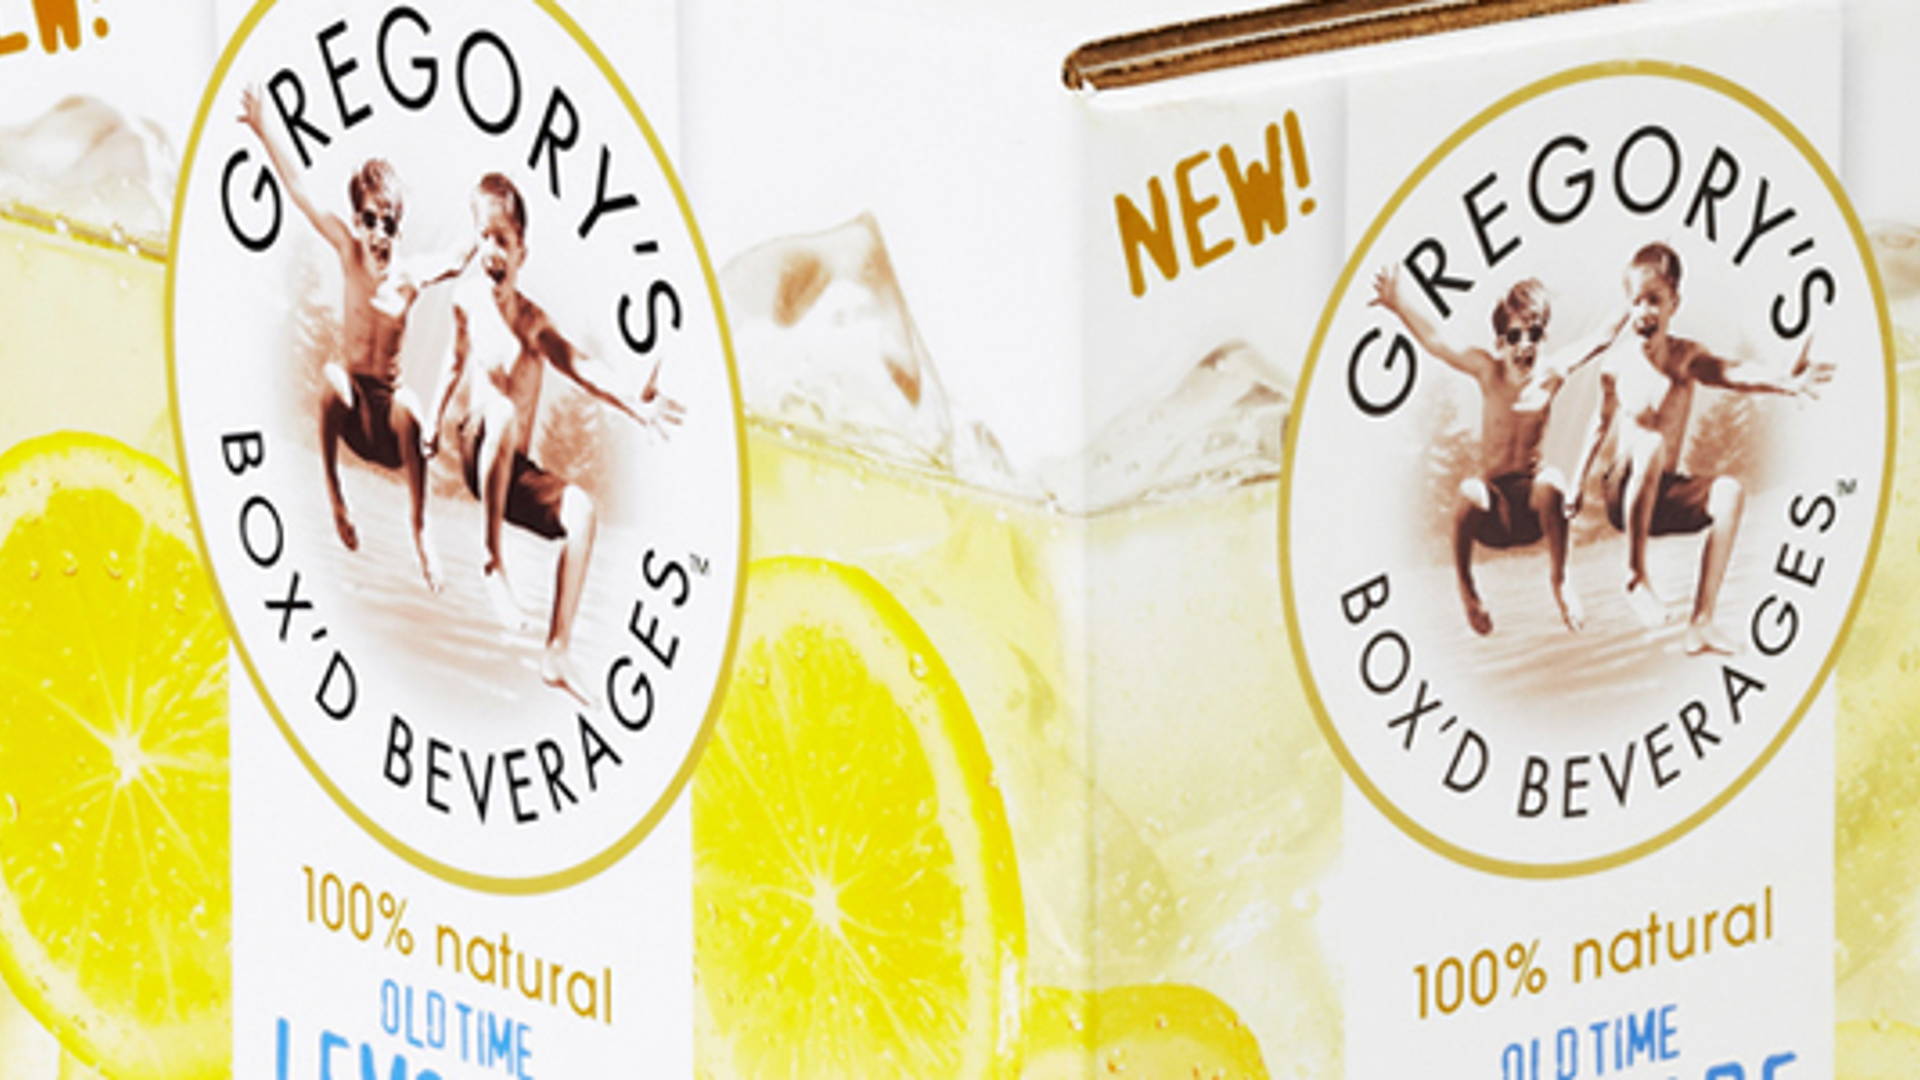 Featured image for Gregory's Box'd Beverages